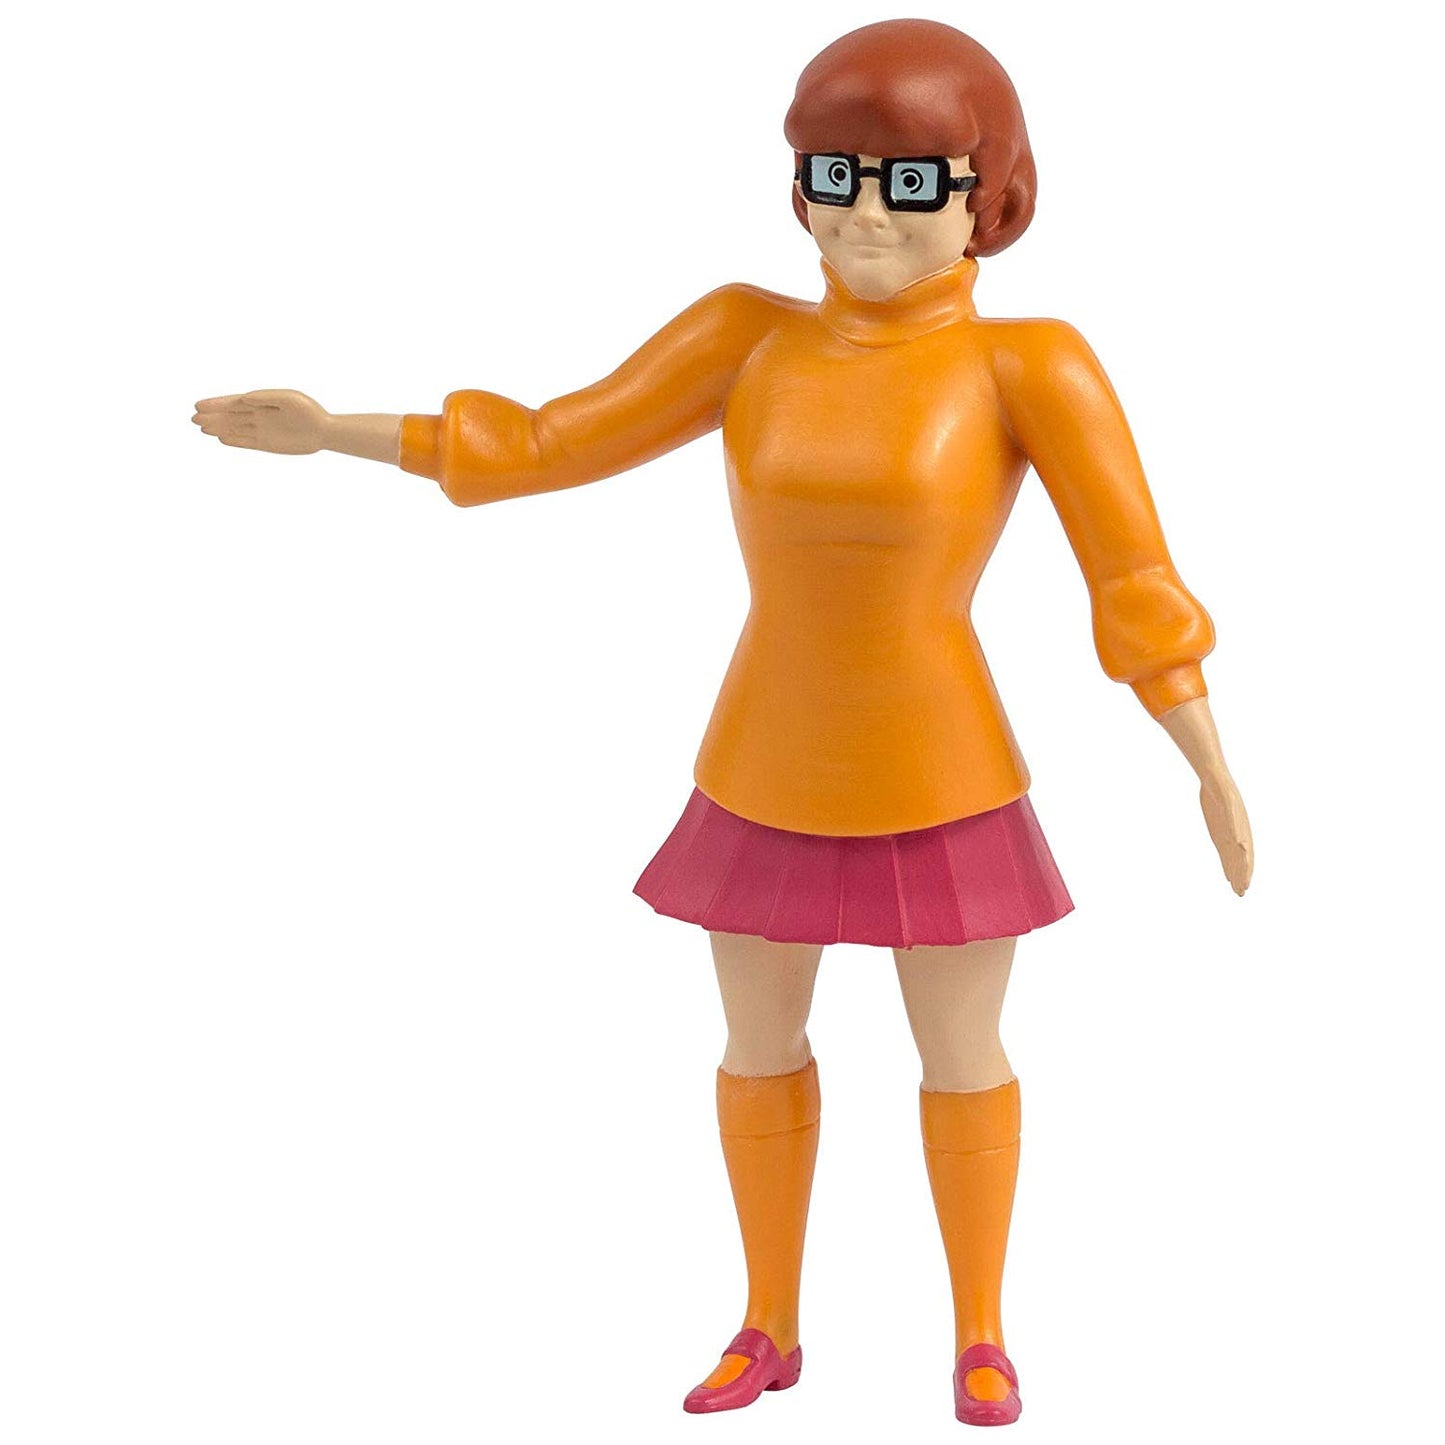 Velma from Scooby-Doo bendable figure